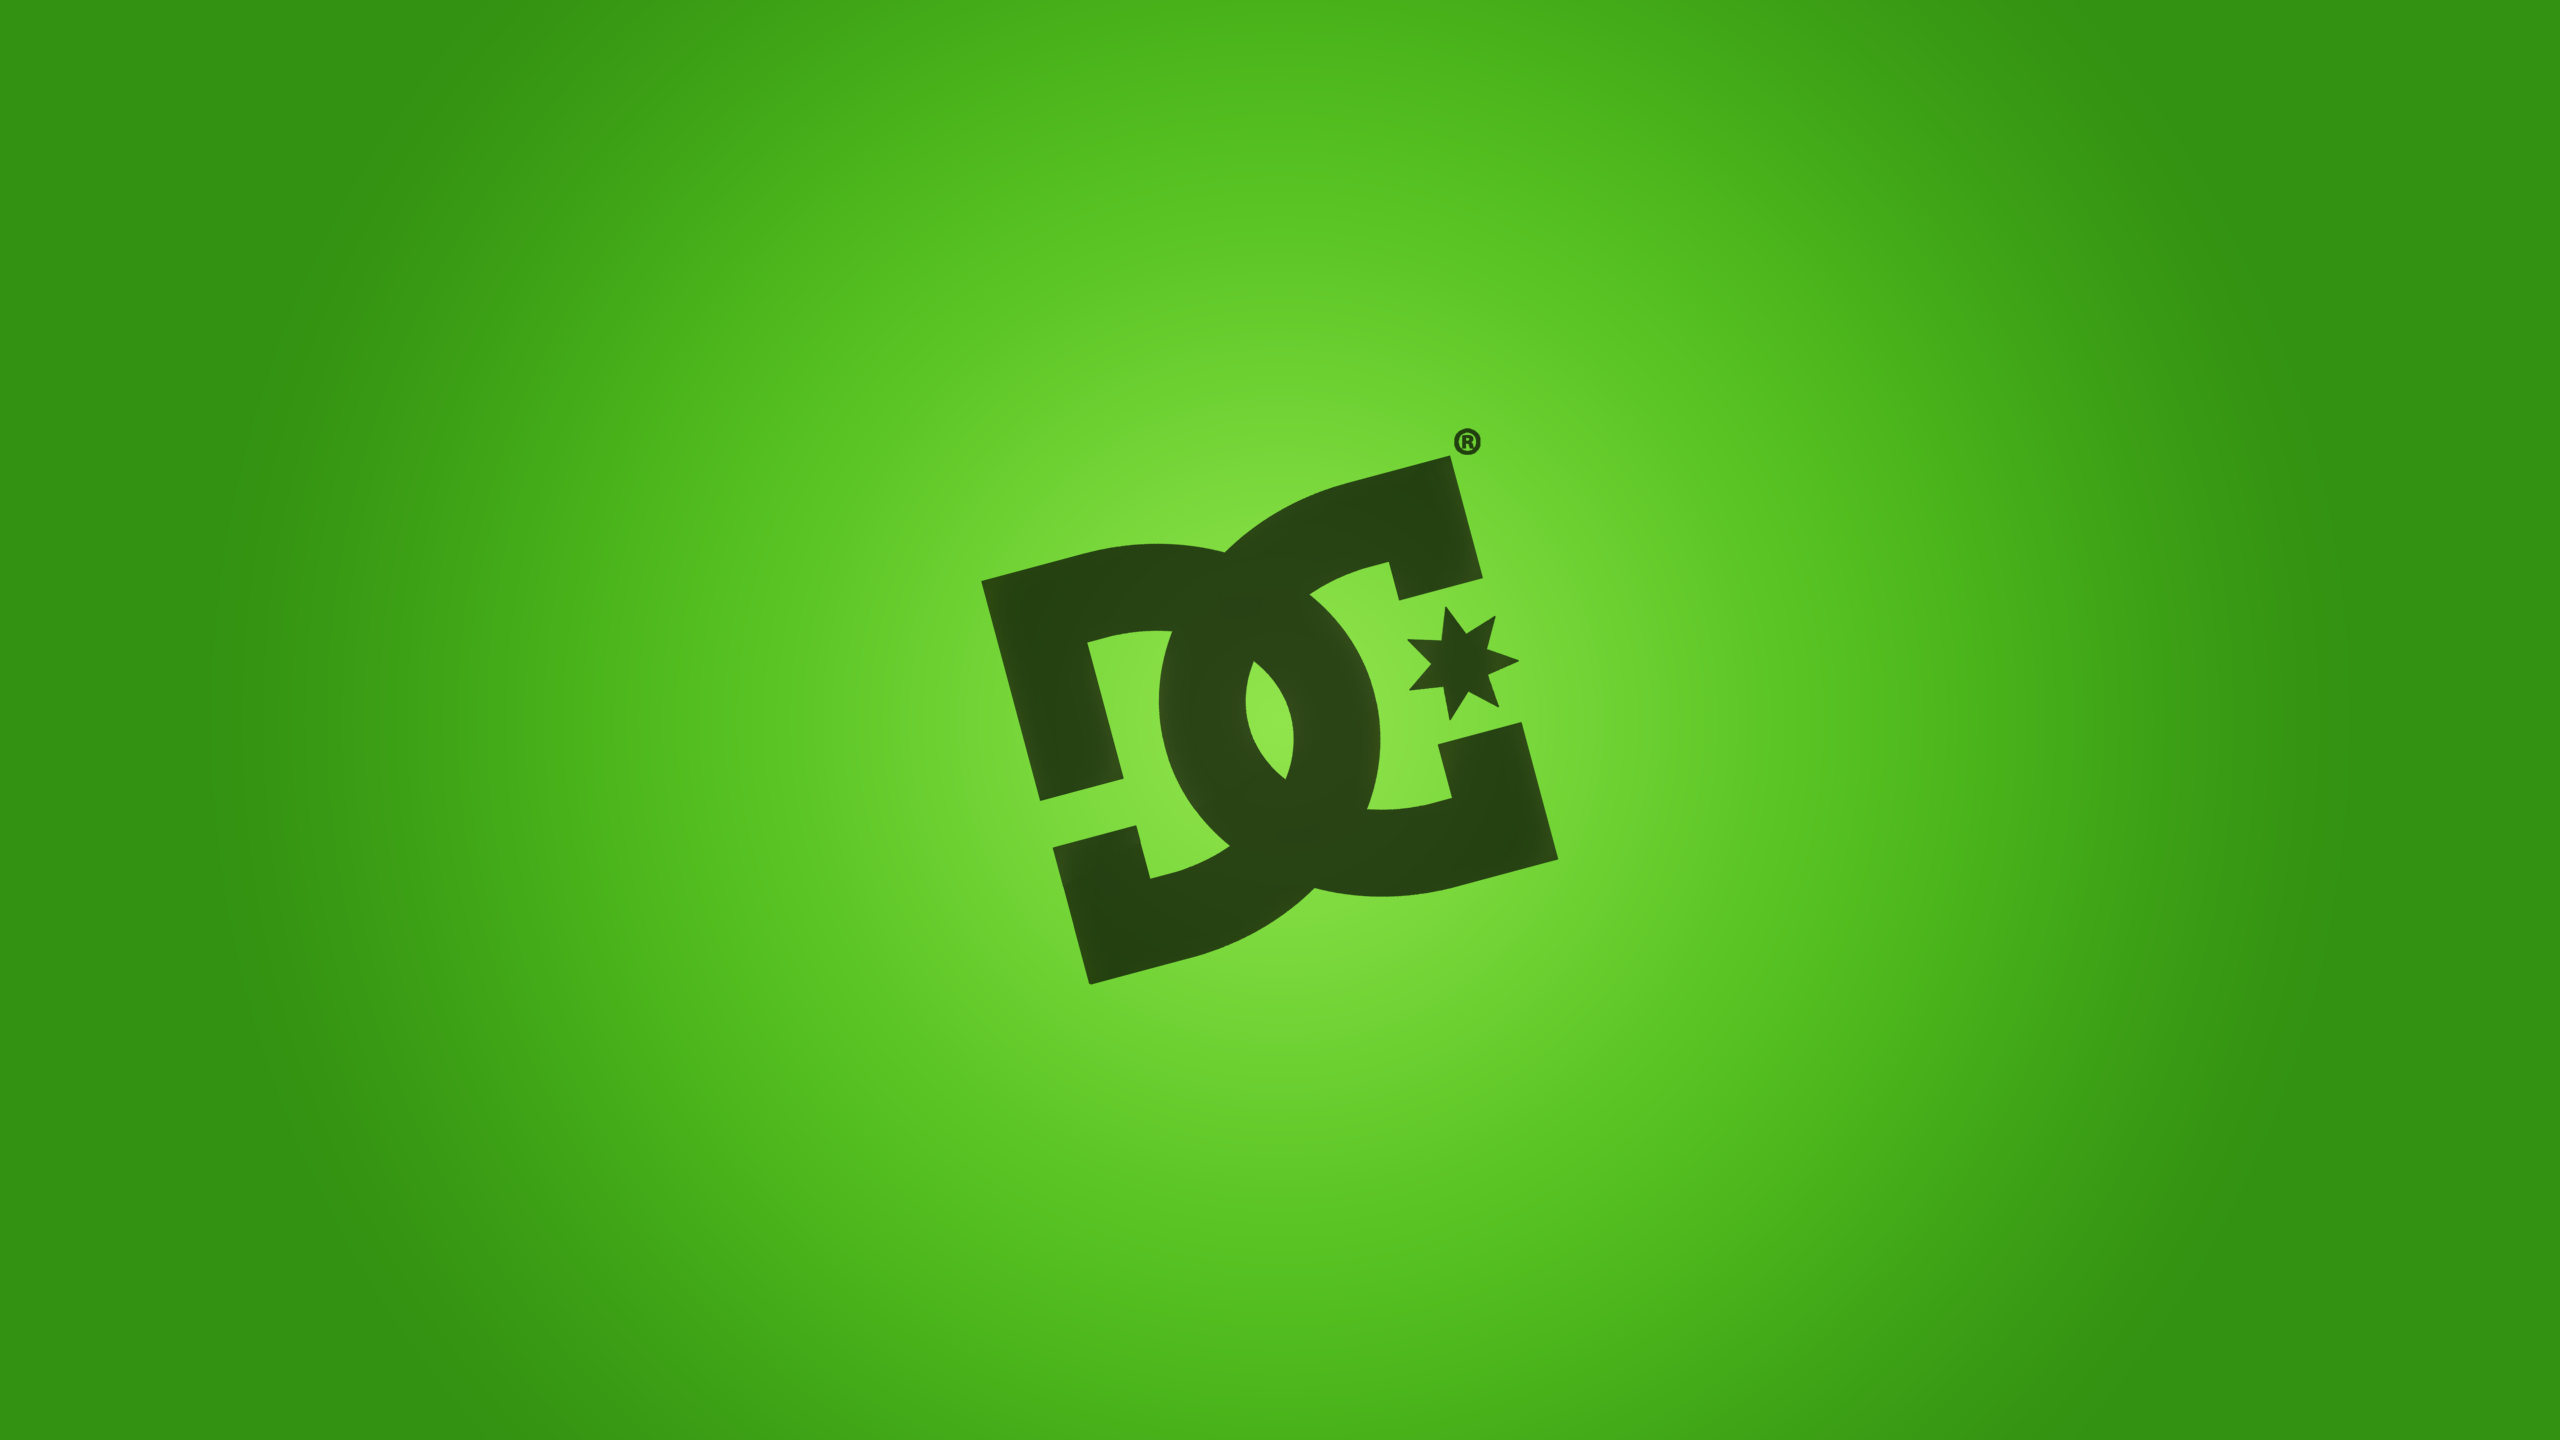 Green DC Shoes Logo HD Wallpaper Background Image Free Download